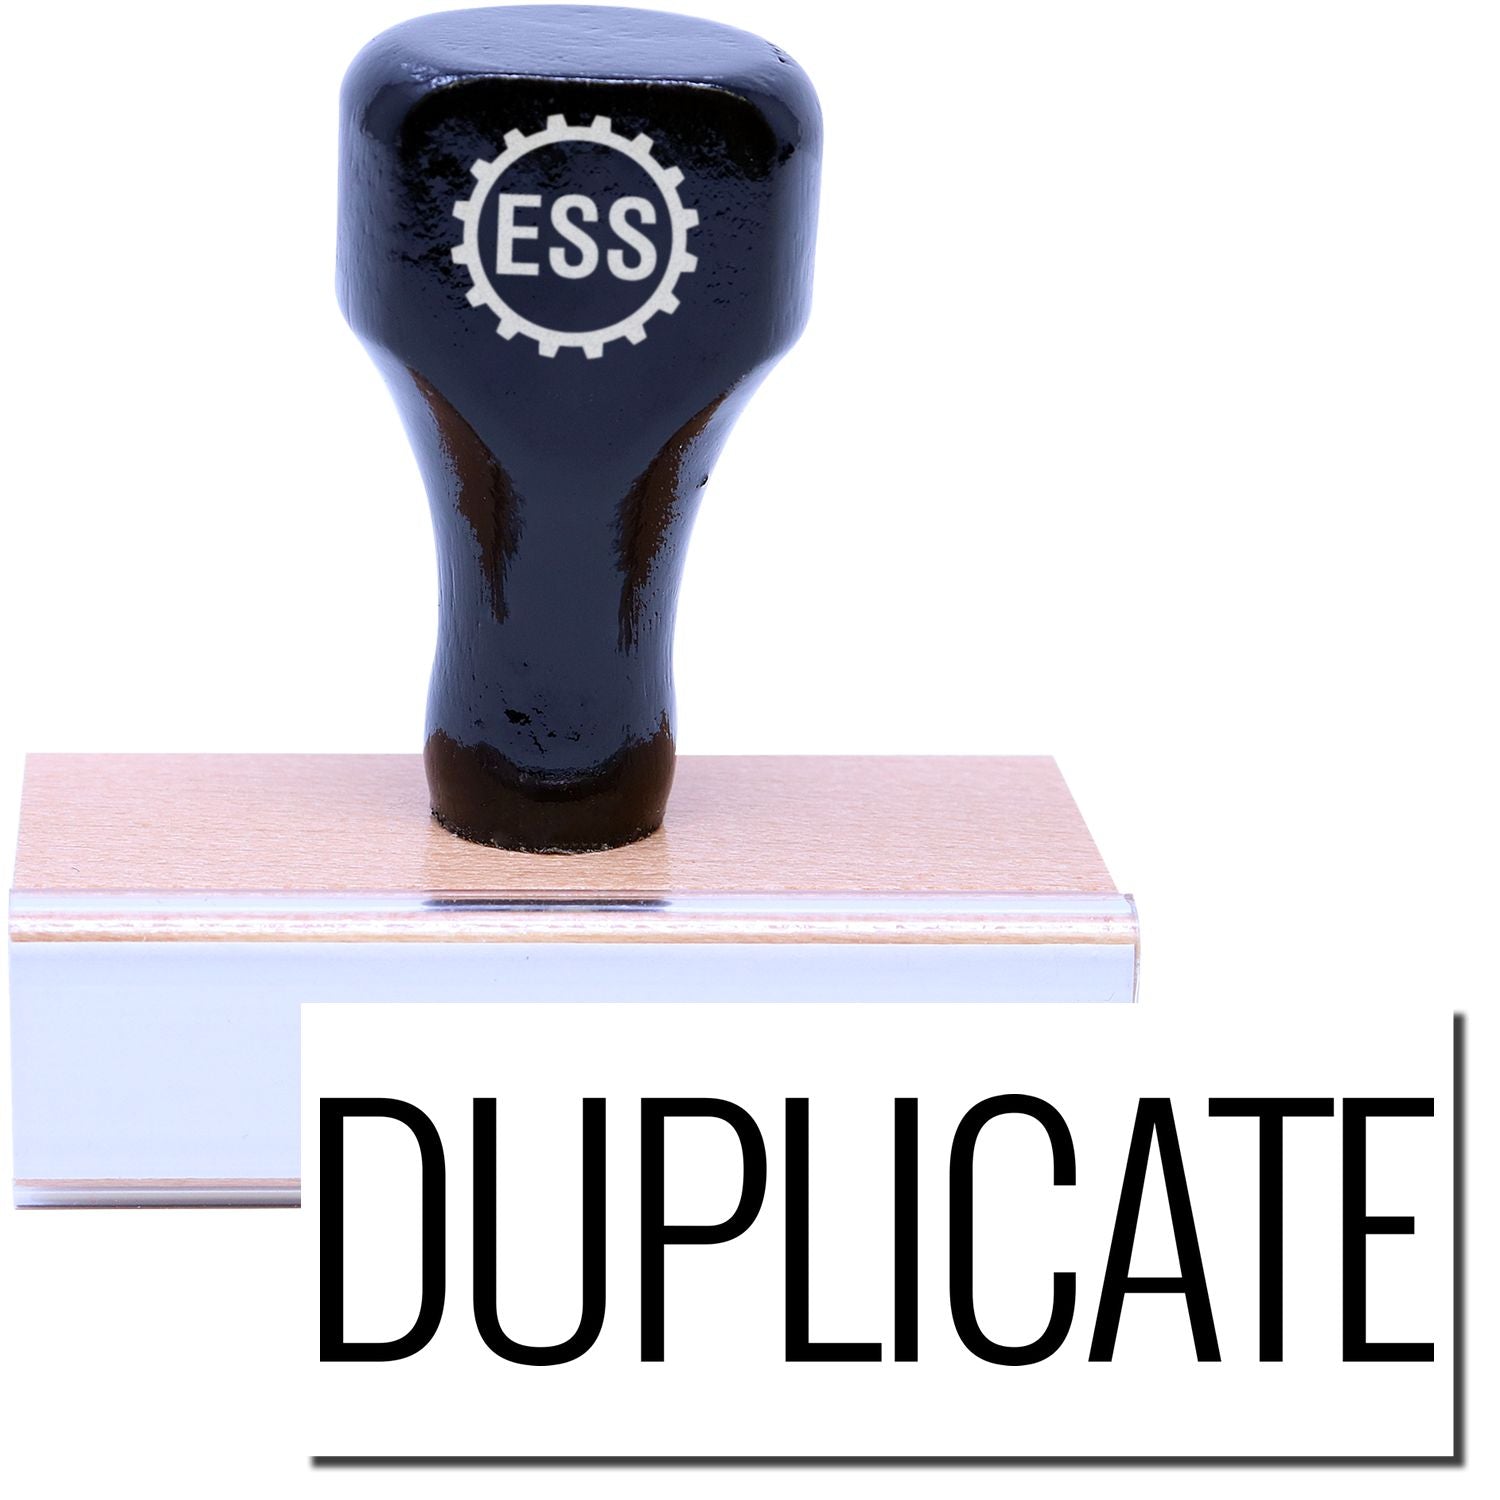 A stock office rubber stamp with a stamped image showing how the text "DUPLICATE" in a narrow font is displayed after stamping.